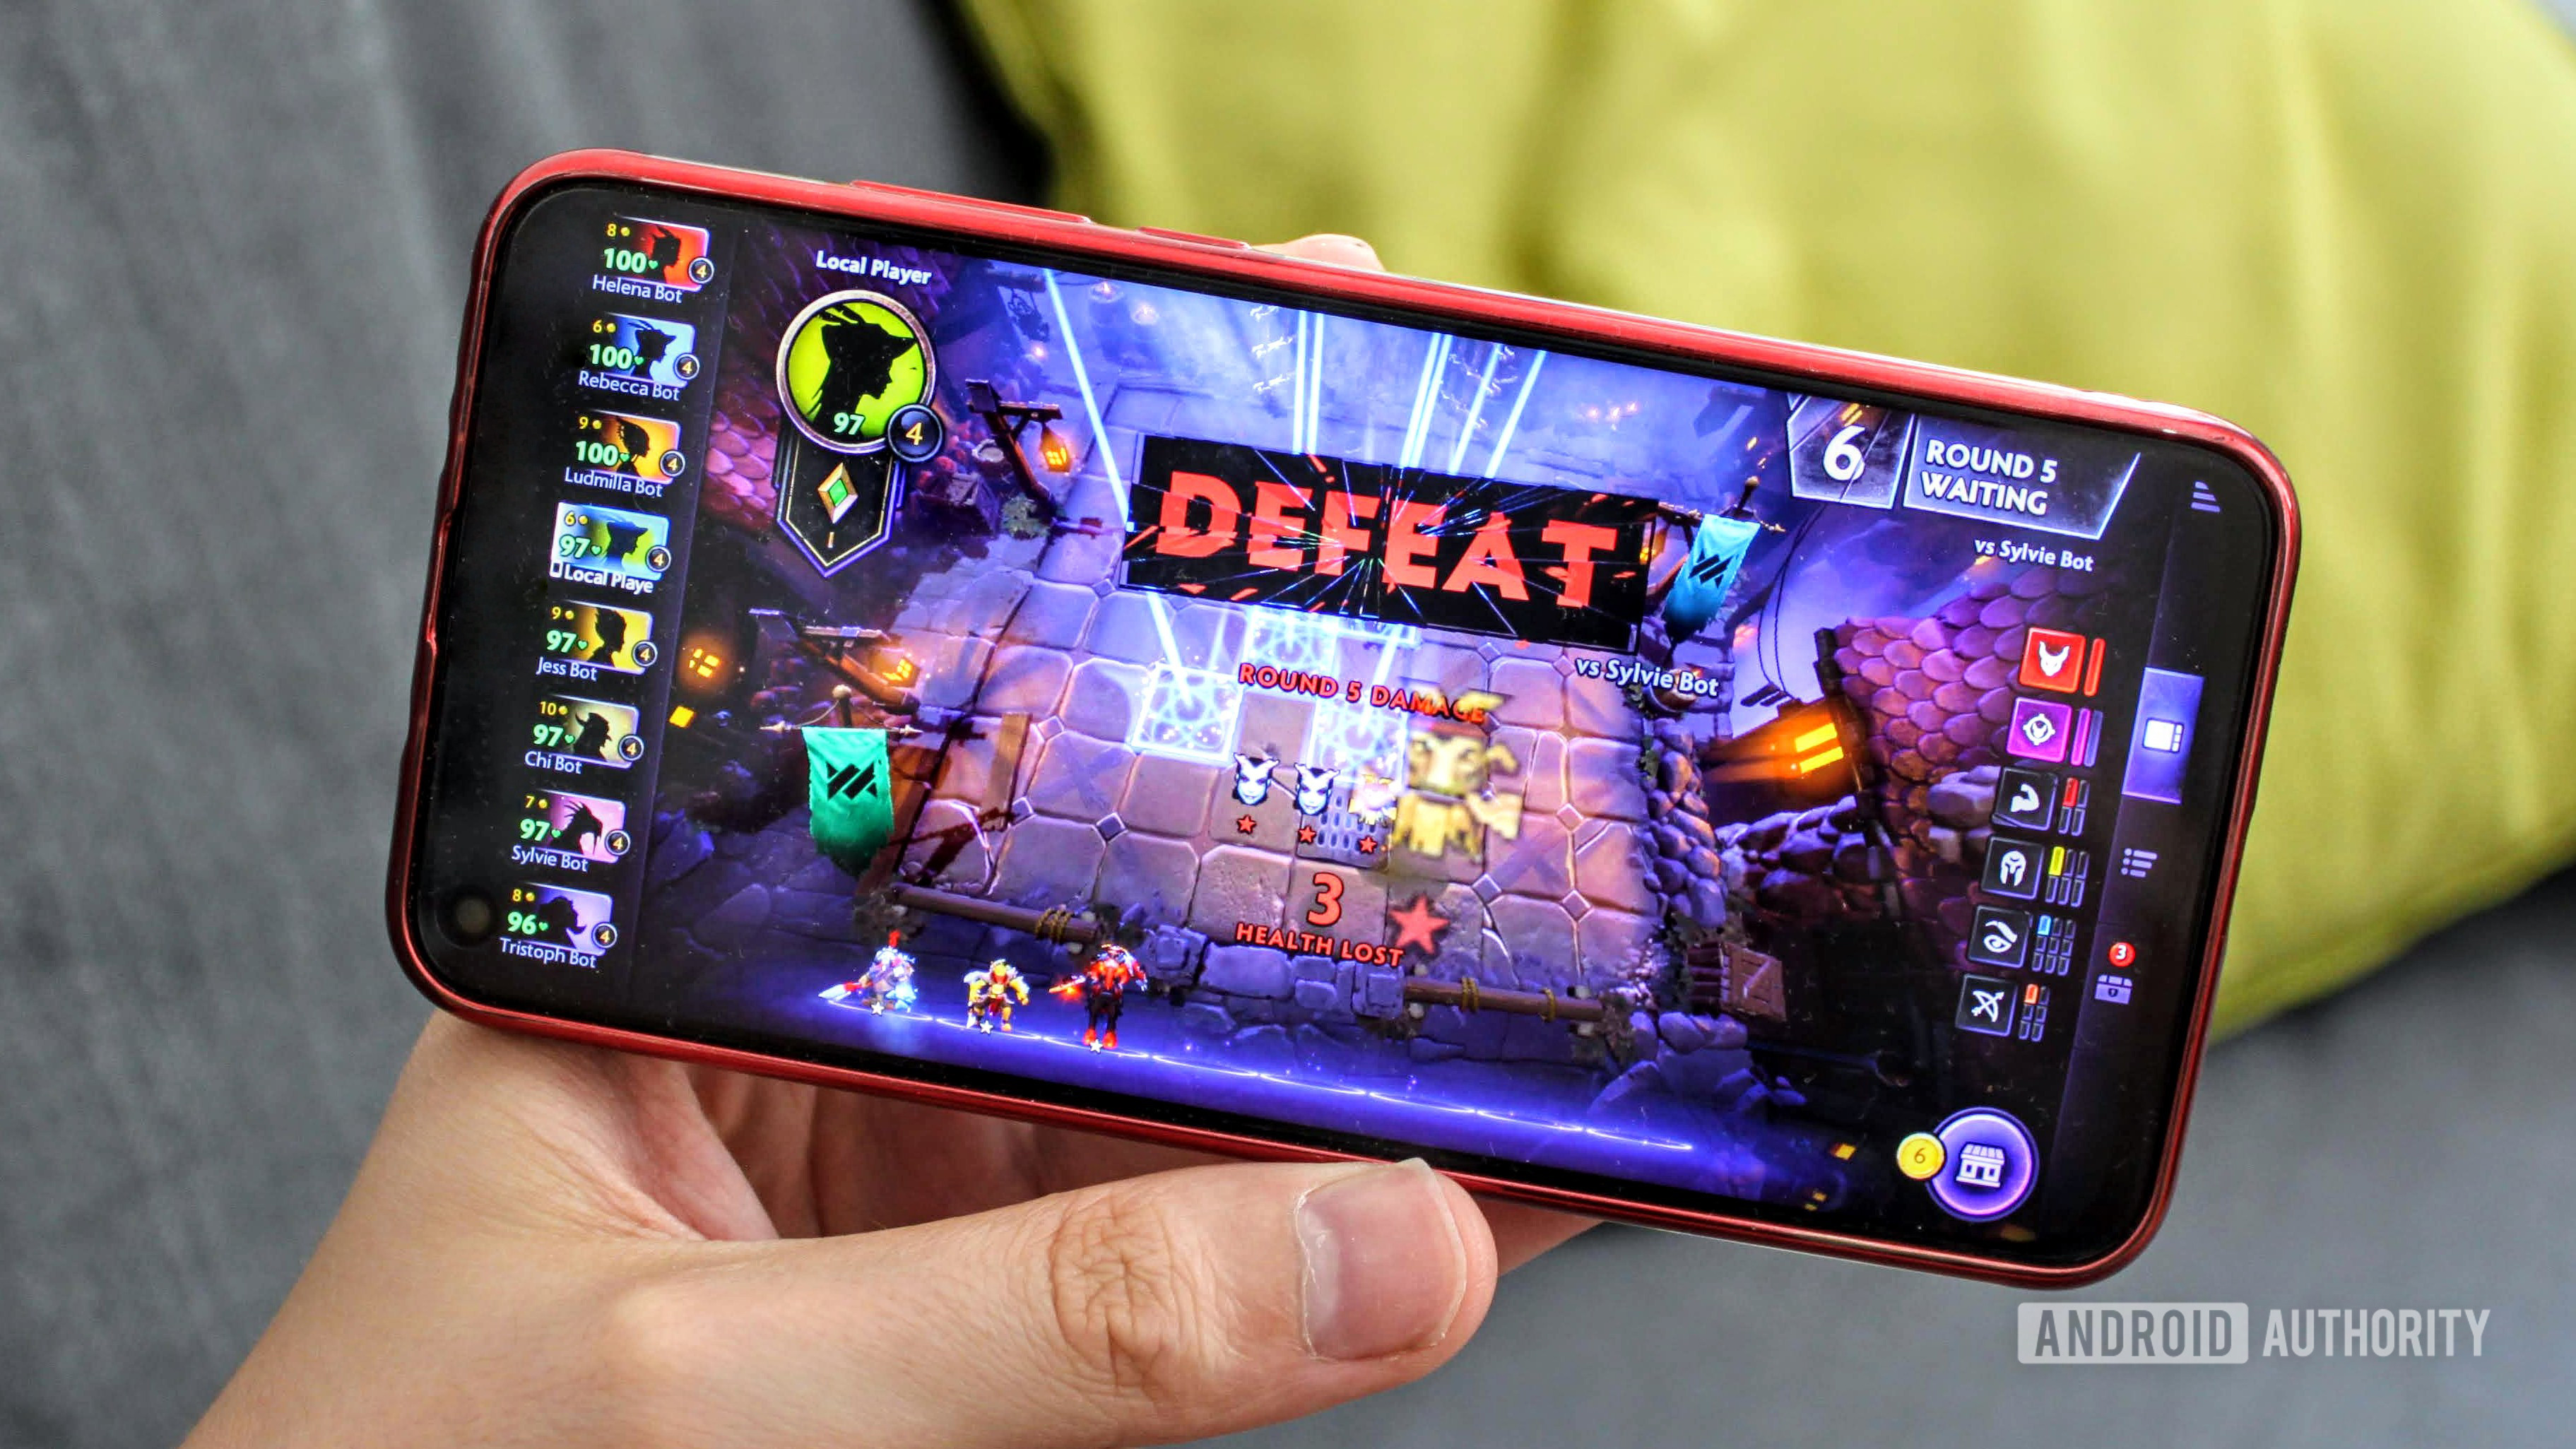 Dota Underlords for Android on the Honor View 20 showing the defeat screen.